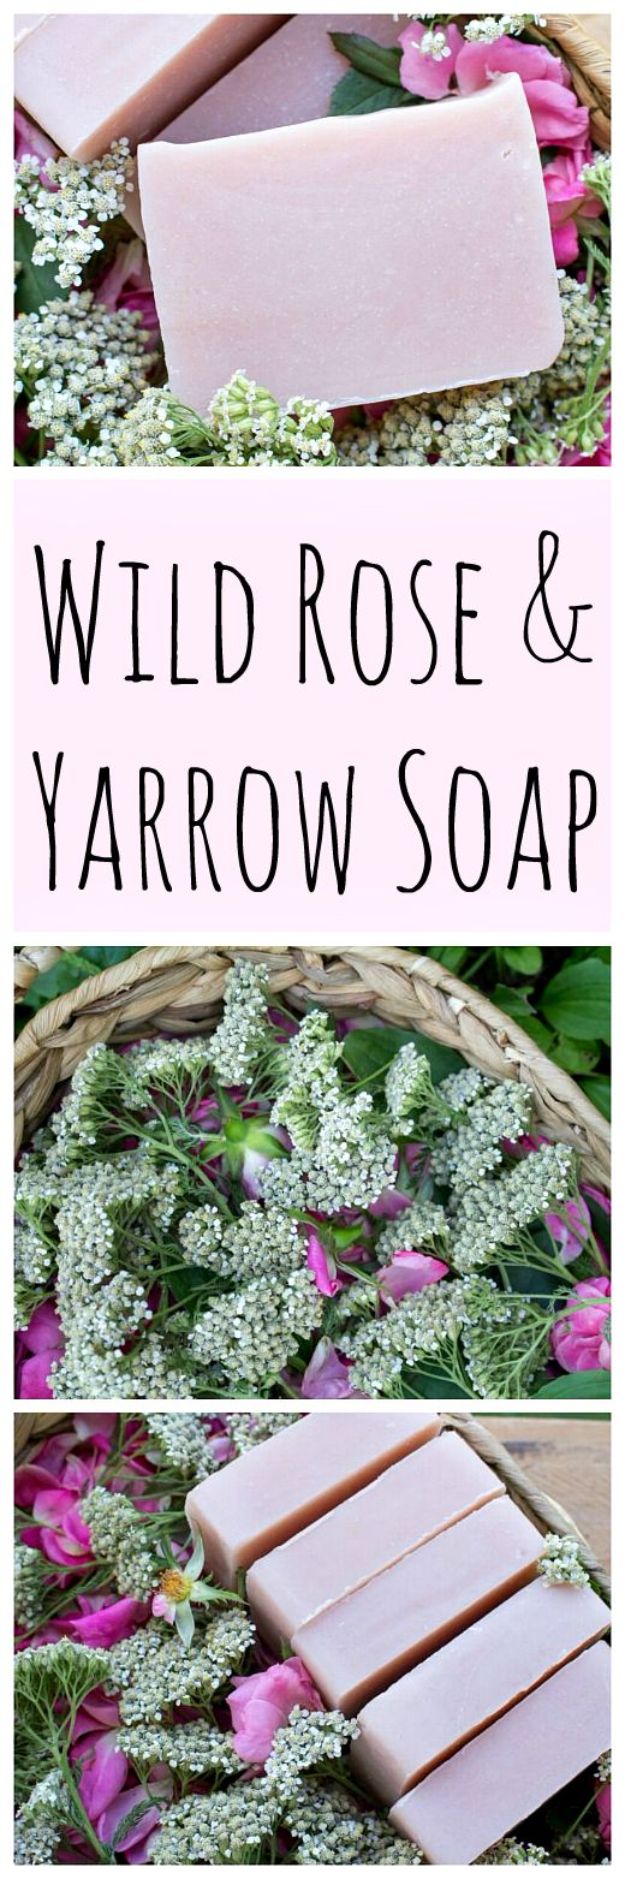 DIY Soap Recipes - Wild Rose And Yarrow Soap - Melt and Pour, Homemade Recipe Without Lye - Natural Soap crafts for Kids - Shea Butter, Essential Oils, Easy Ides With 3 Ingredients - soap recipes with step by step tutorials #soap #diygifts